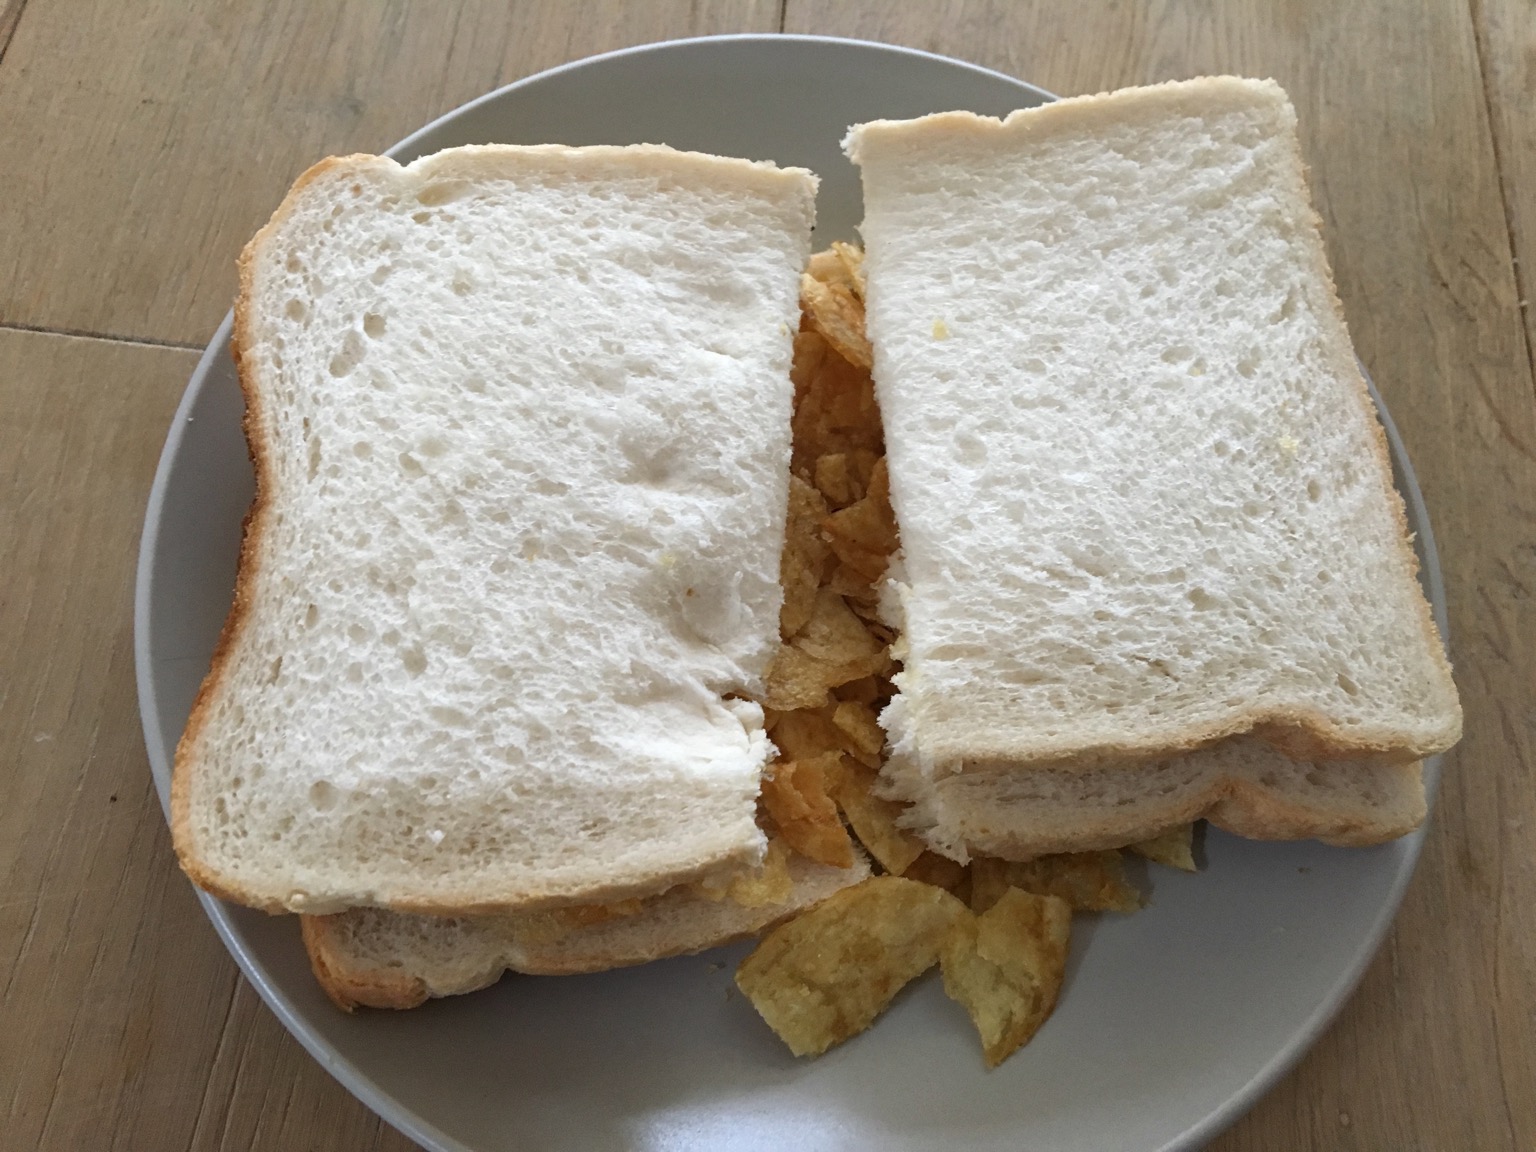 Halved crisp sandwich made with white bread